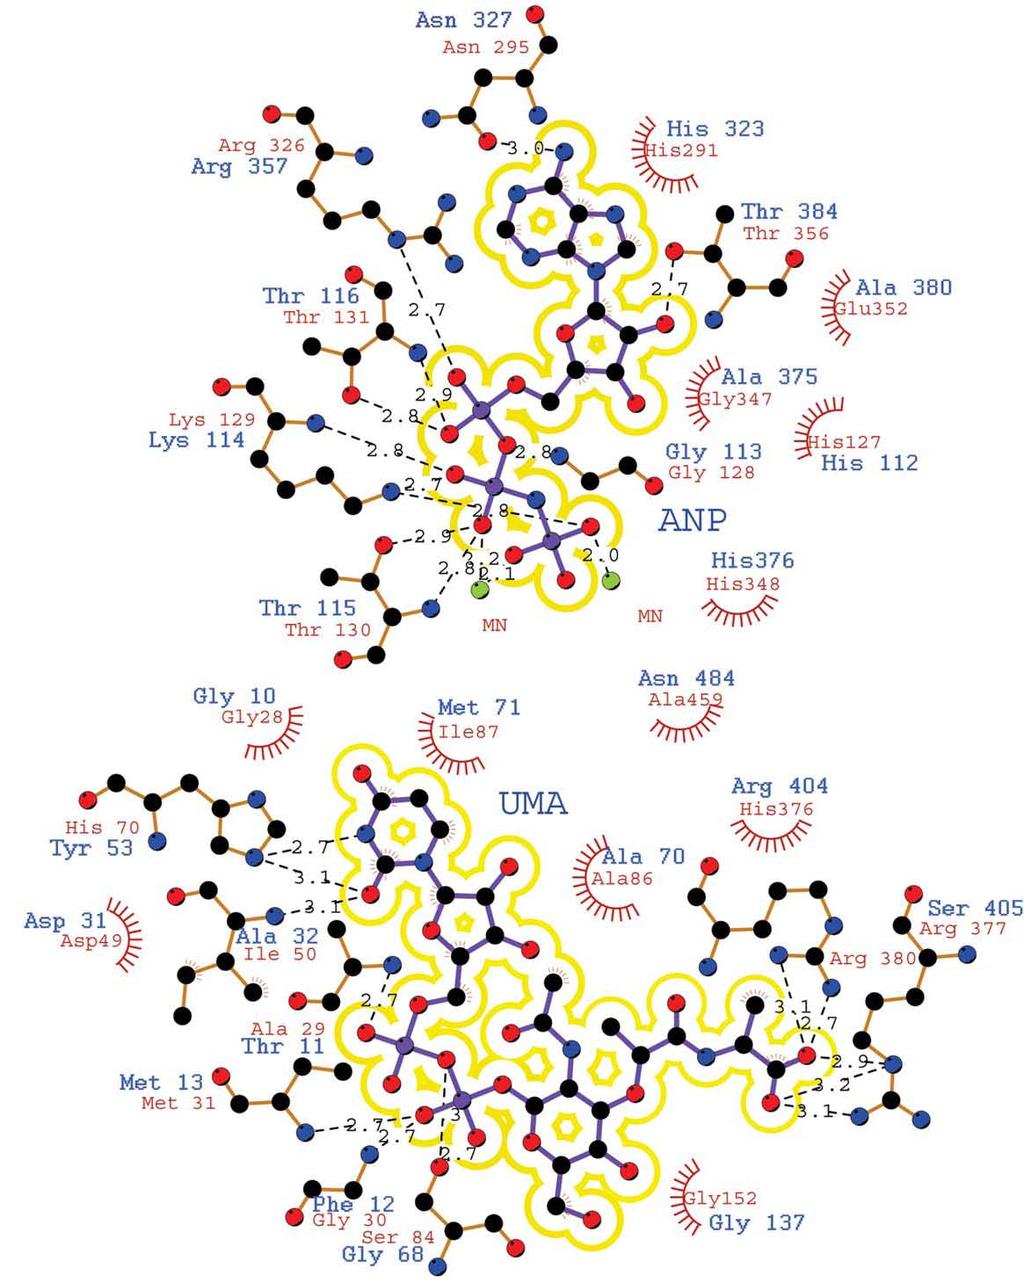 Part 6. PaMpl residues involved in substrates interactions (ND and MD). Interactions between HiMurC and ligands UMA and ANP.